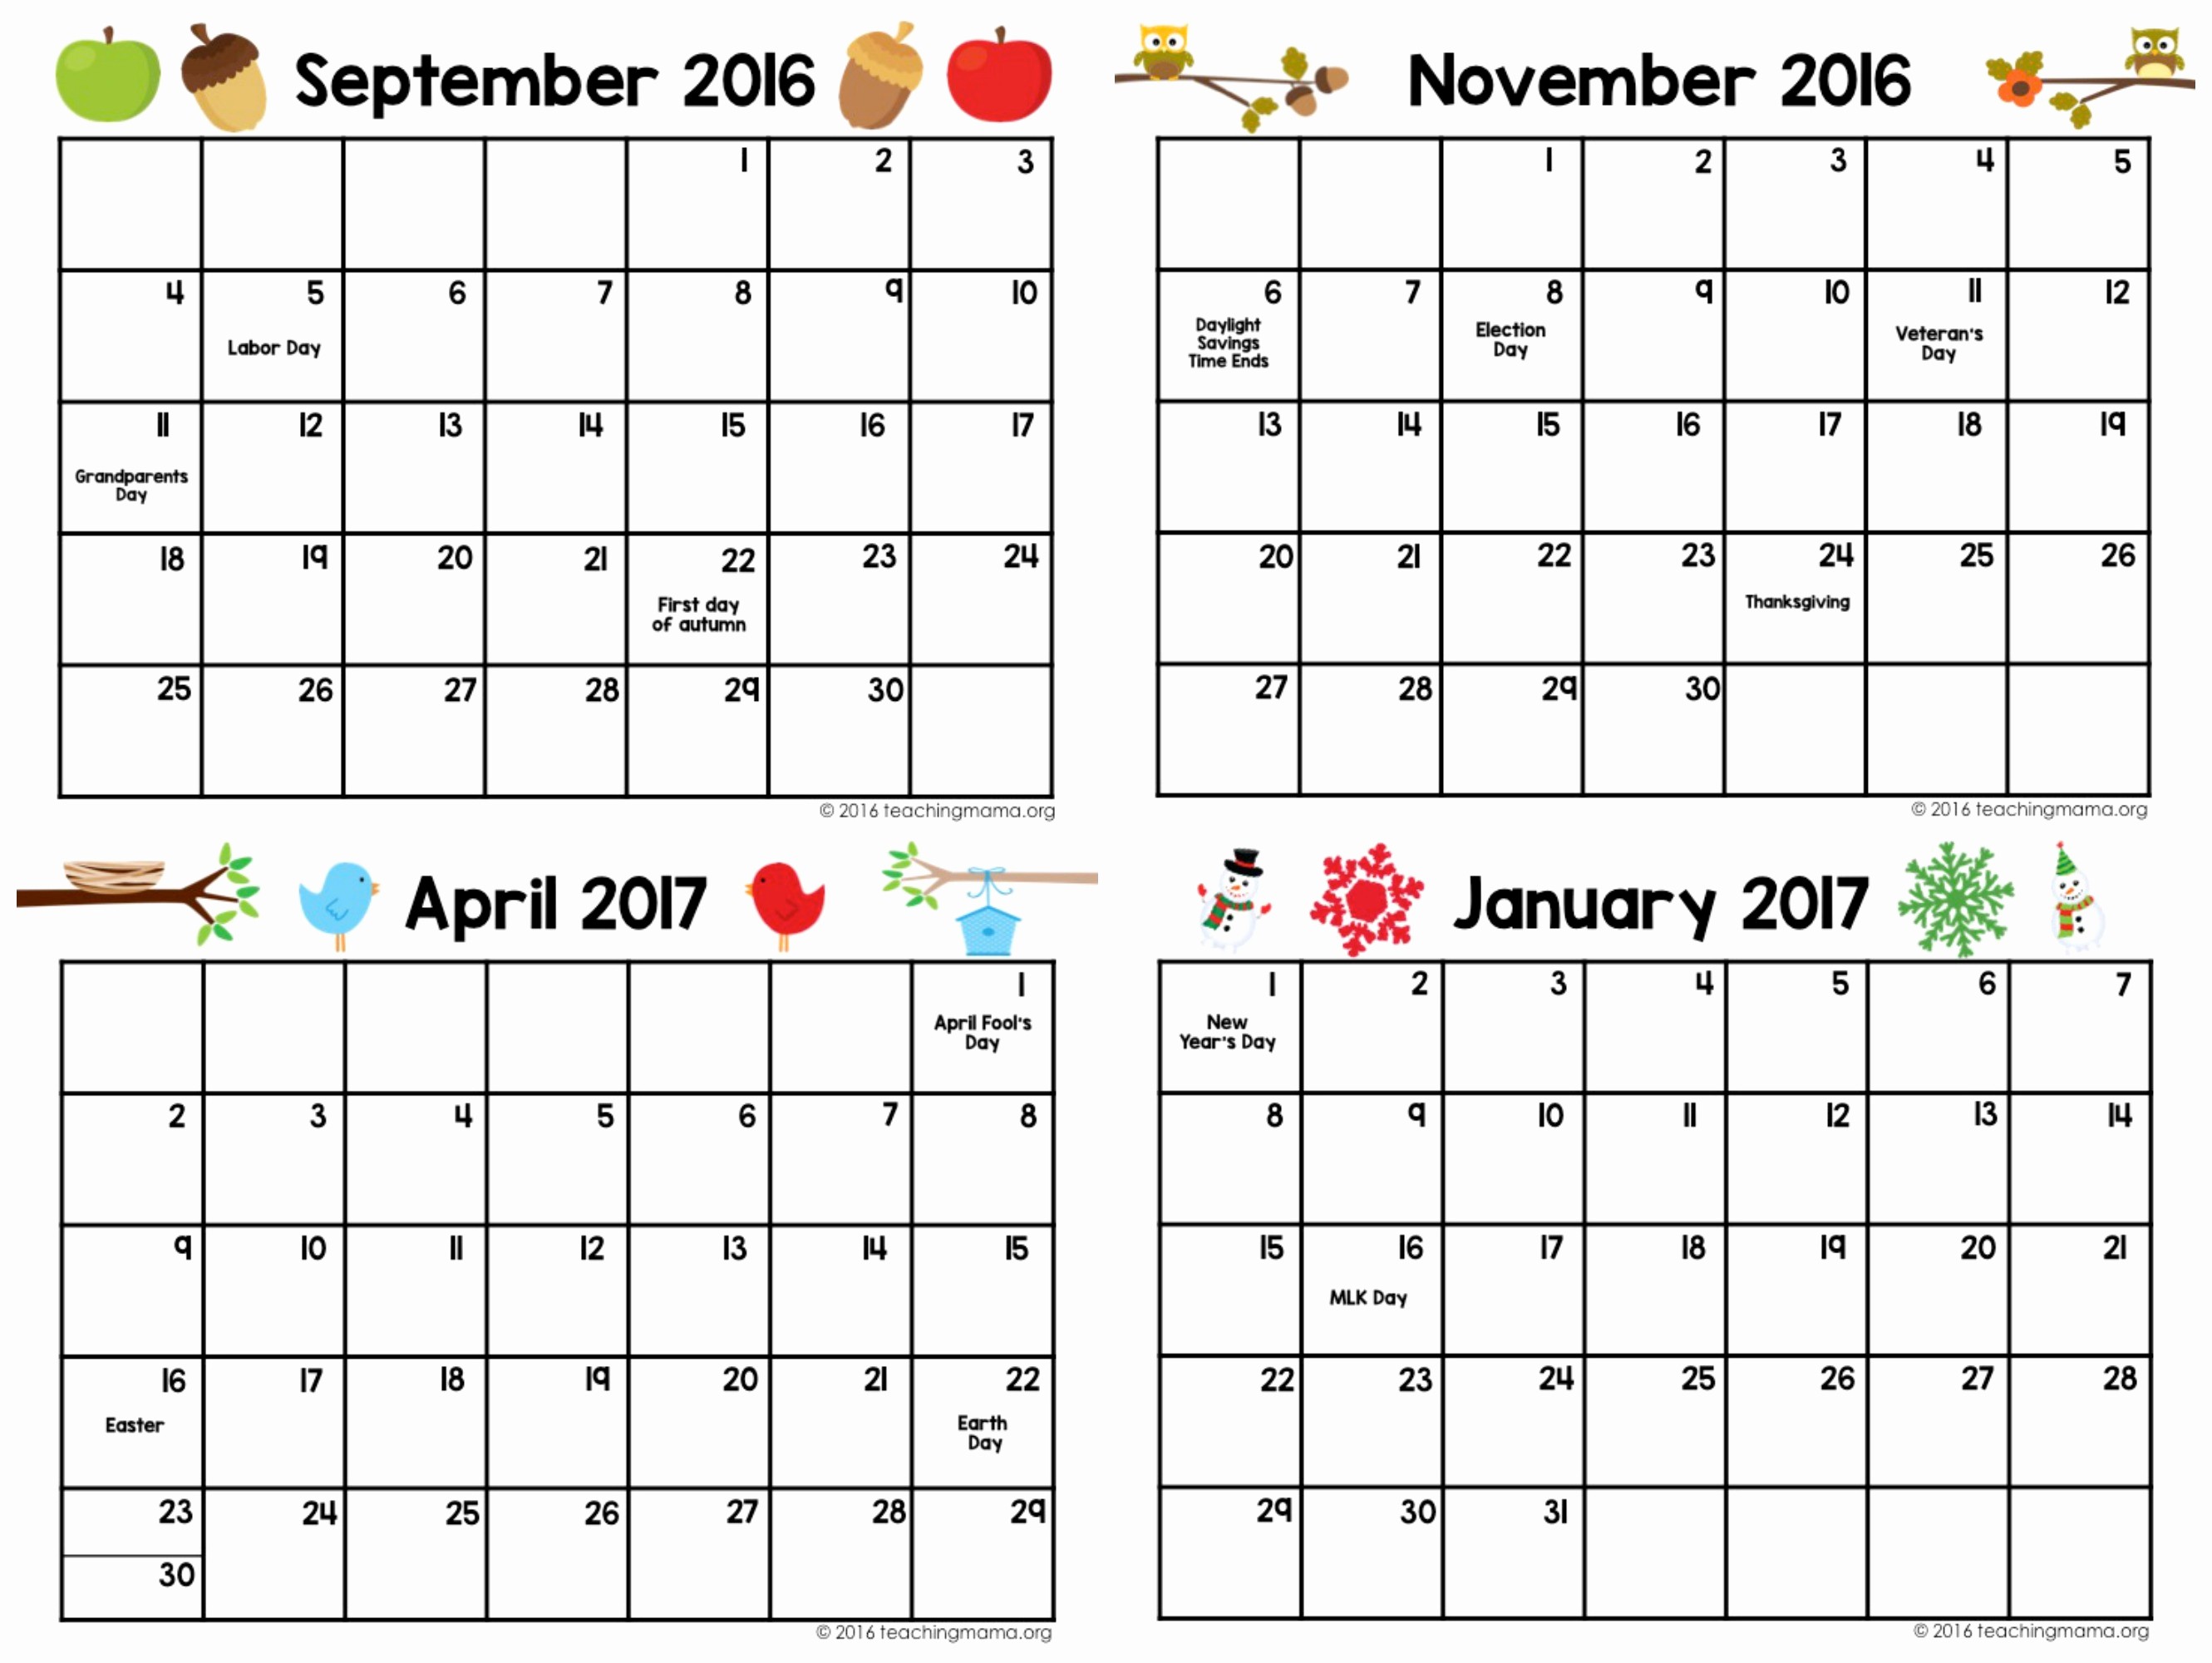 Calendar 2016 to Write On Inspirational Printable Calendar by Week that You Can Write In